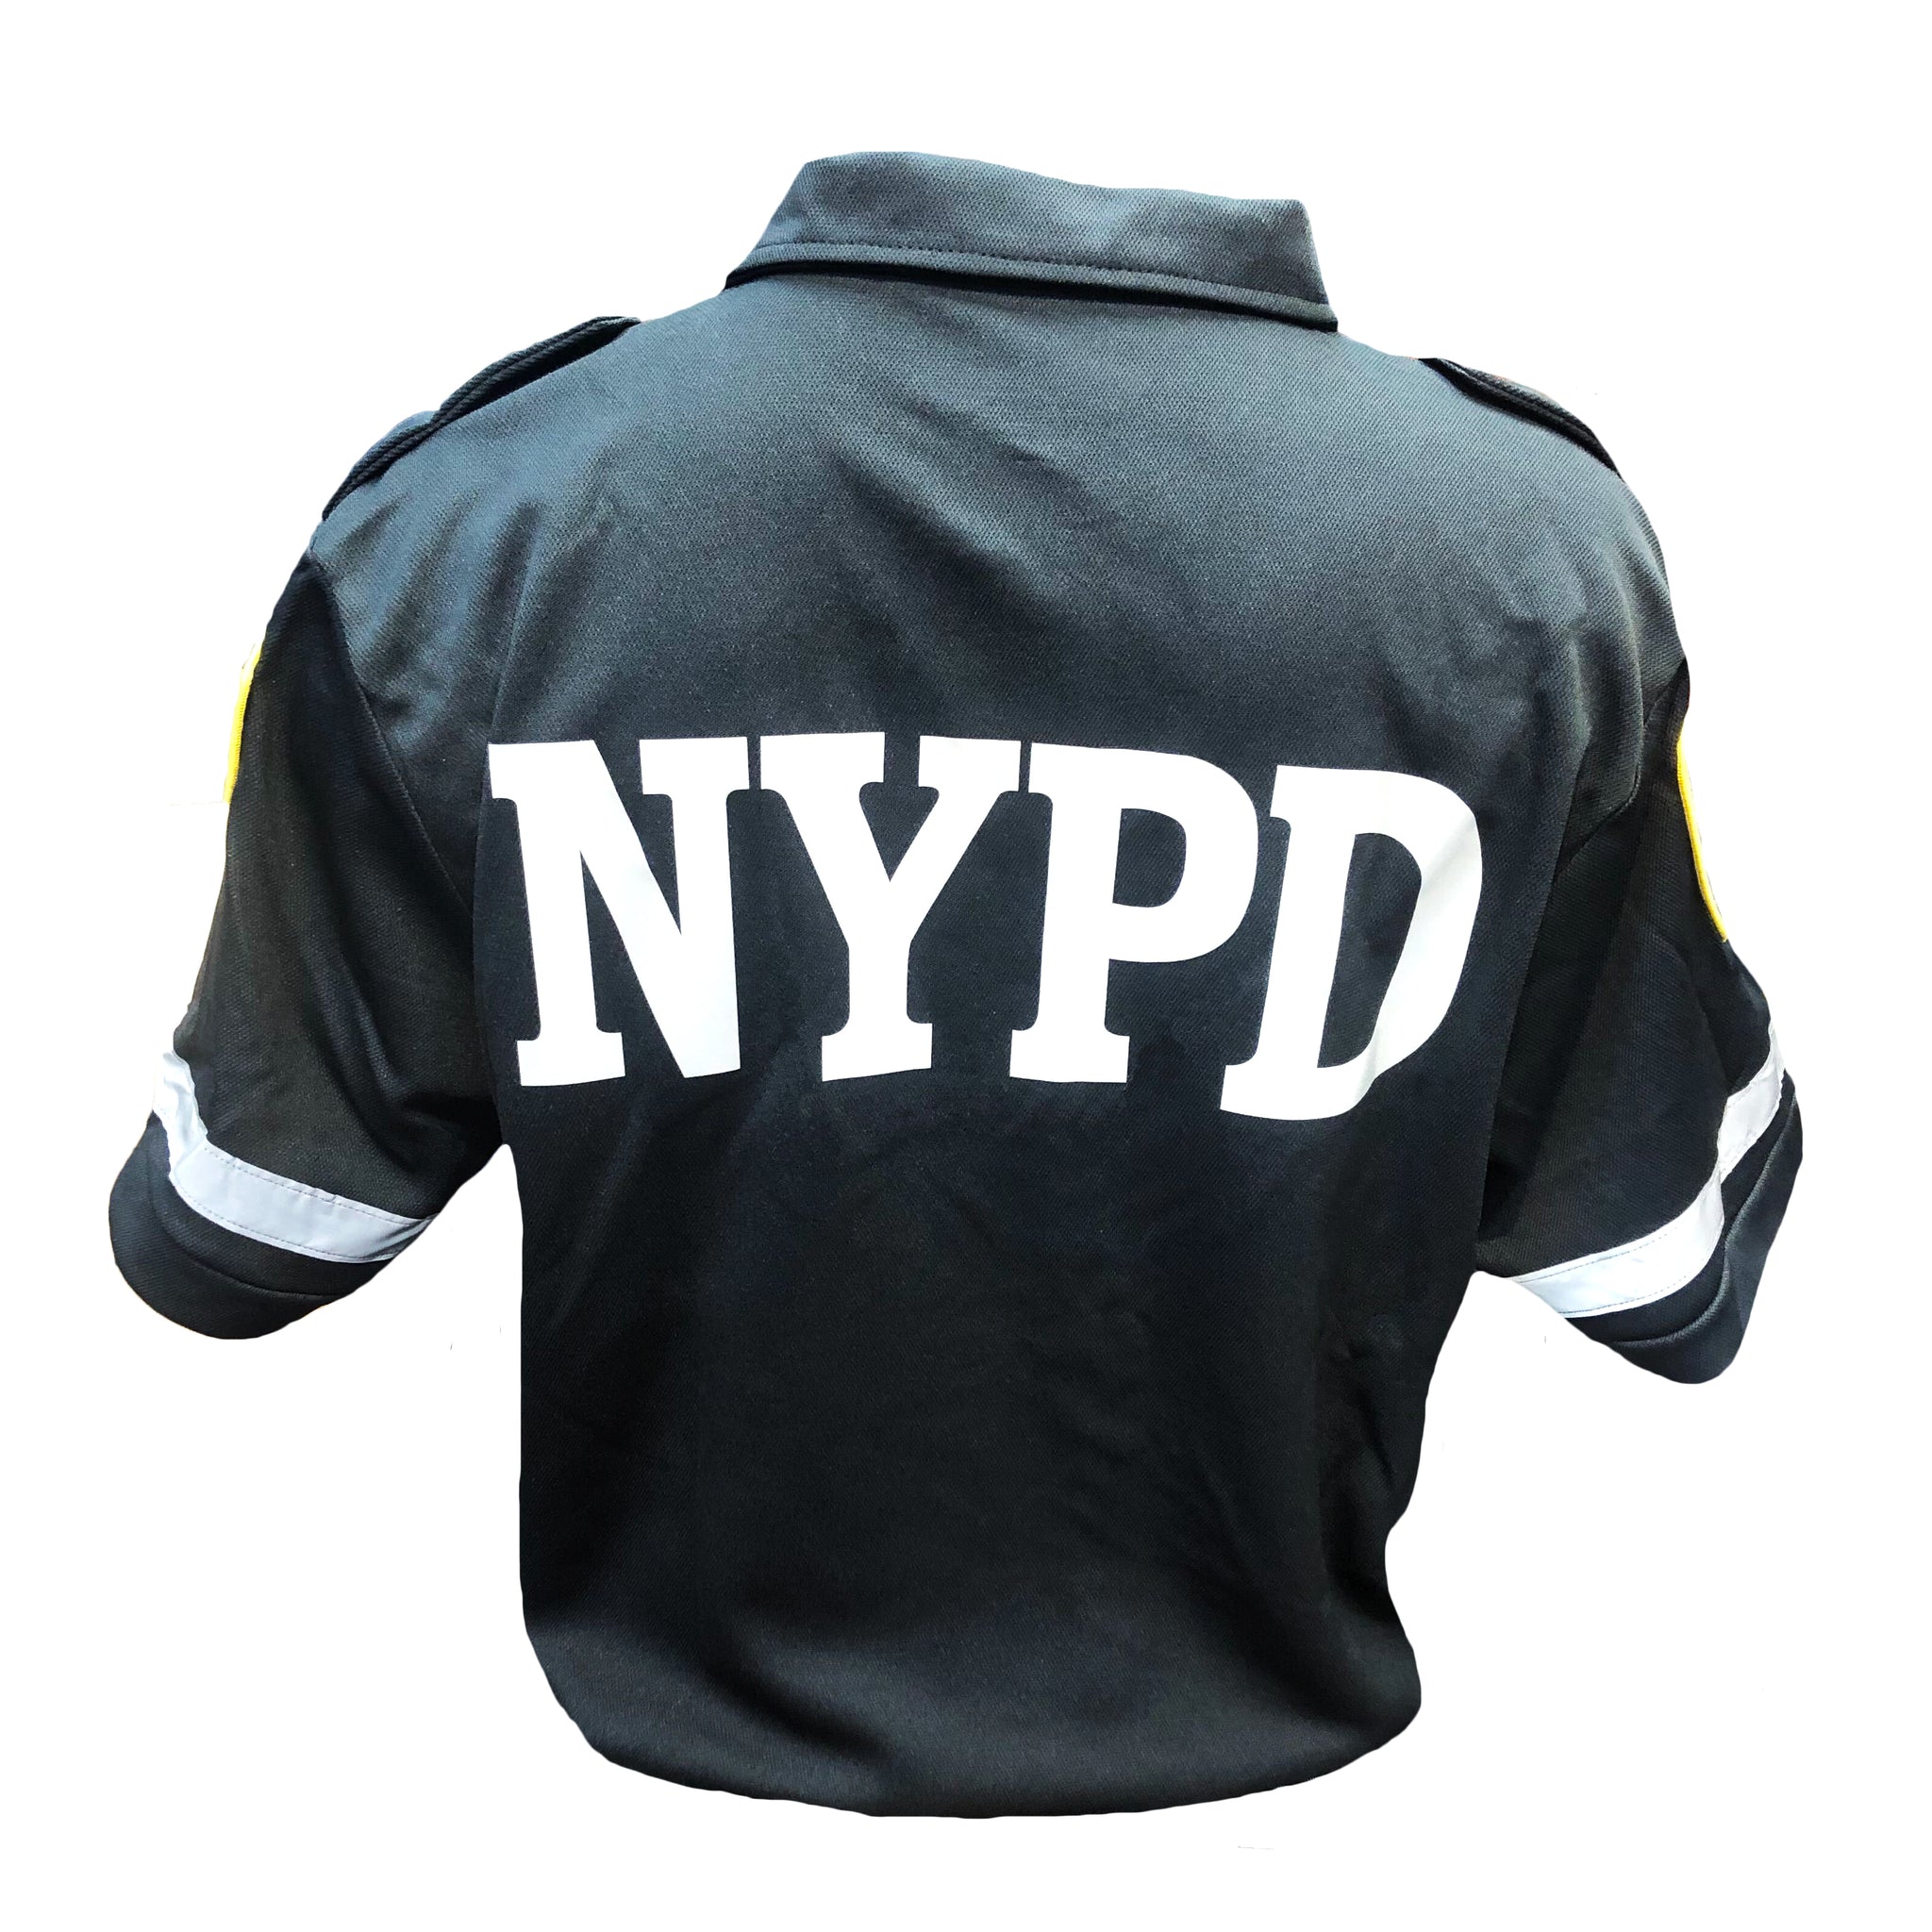 Majestic NYPD T-Shirts for Men